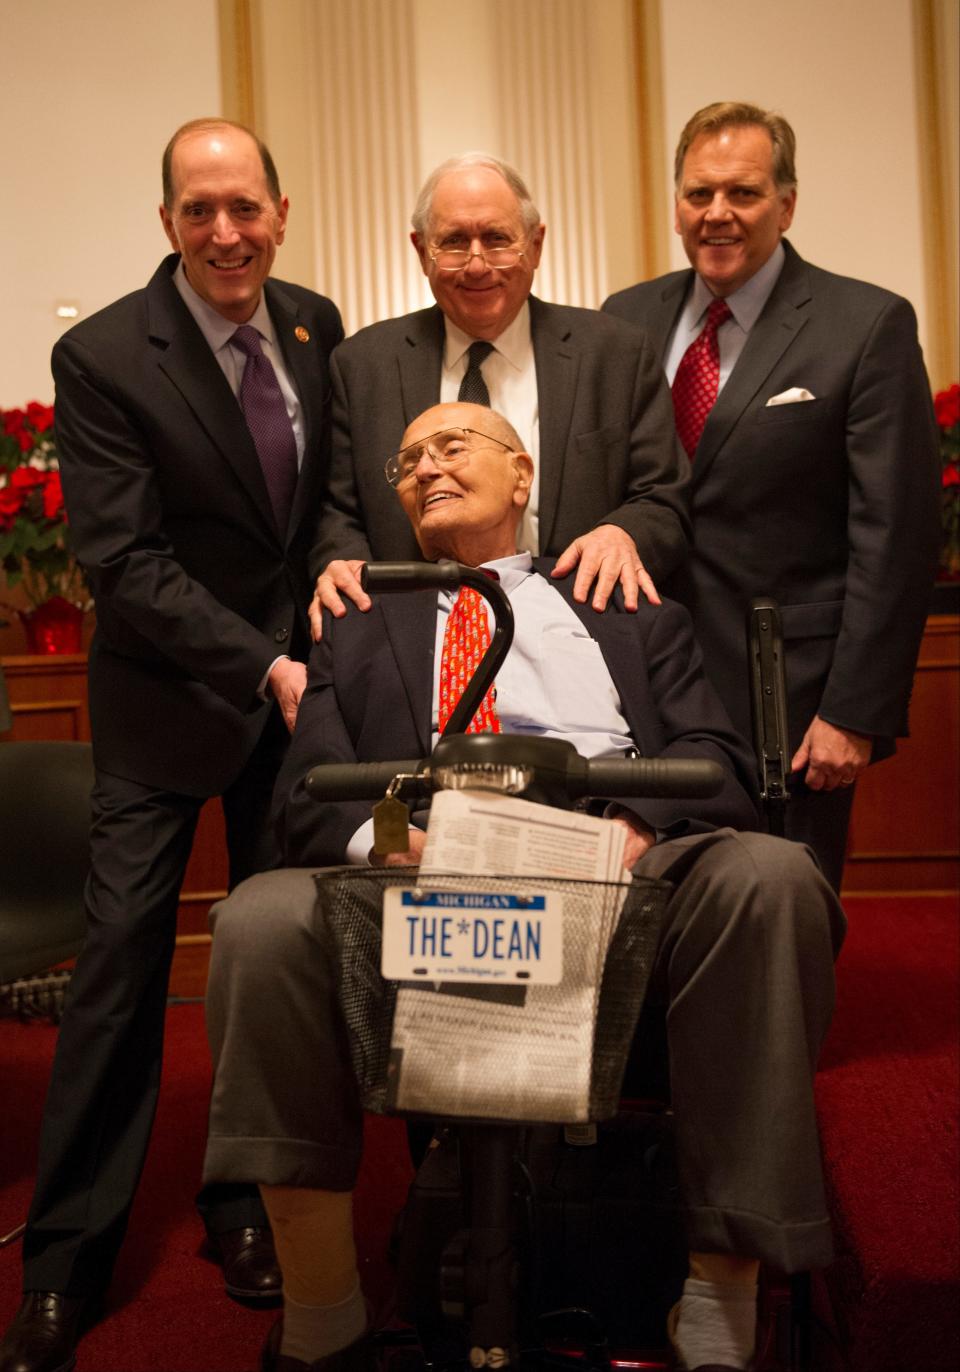 Four retiring Congressional members from the State of Michigan, Reps. John Dingell, (front) Dave Camp, (left) Mike Rogers (right) and Sen. Carl Levin (middle) are all departing Congress.Together they have 133 years of service at the Capitol.